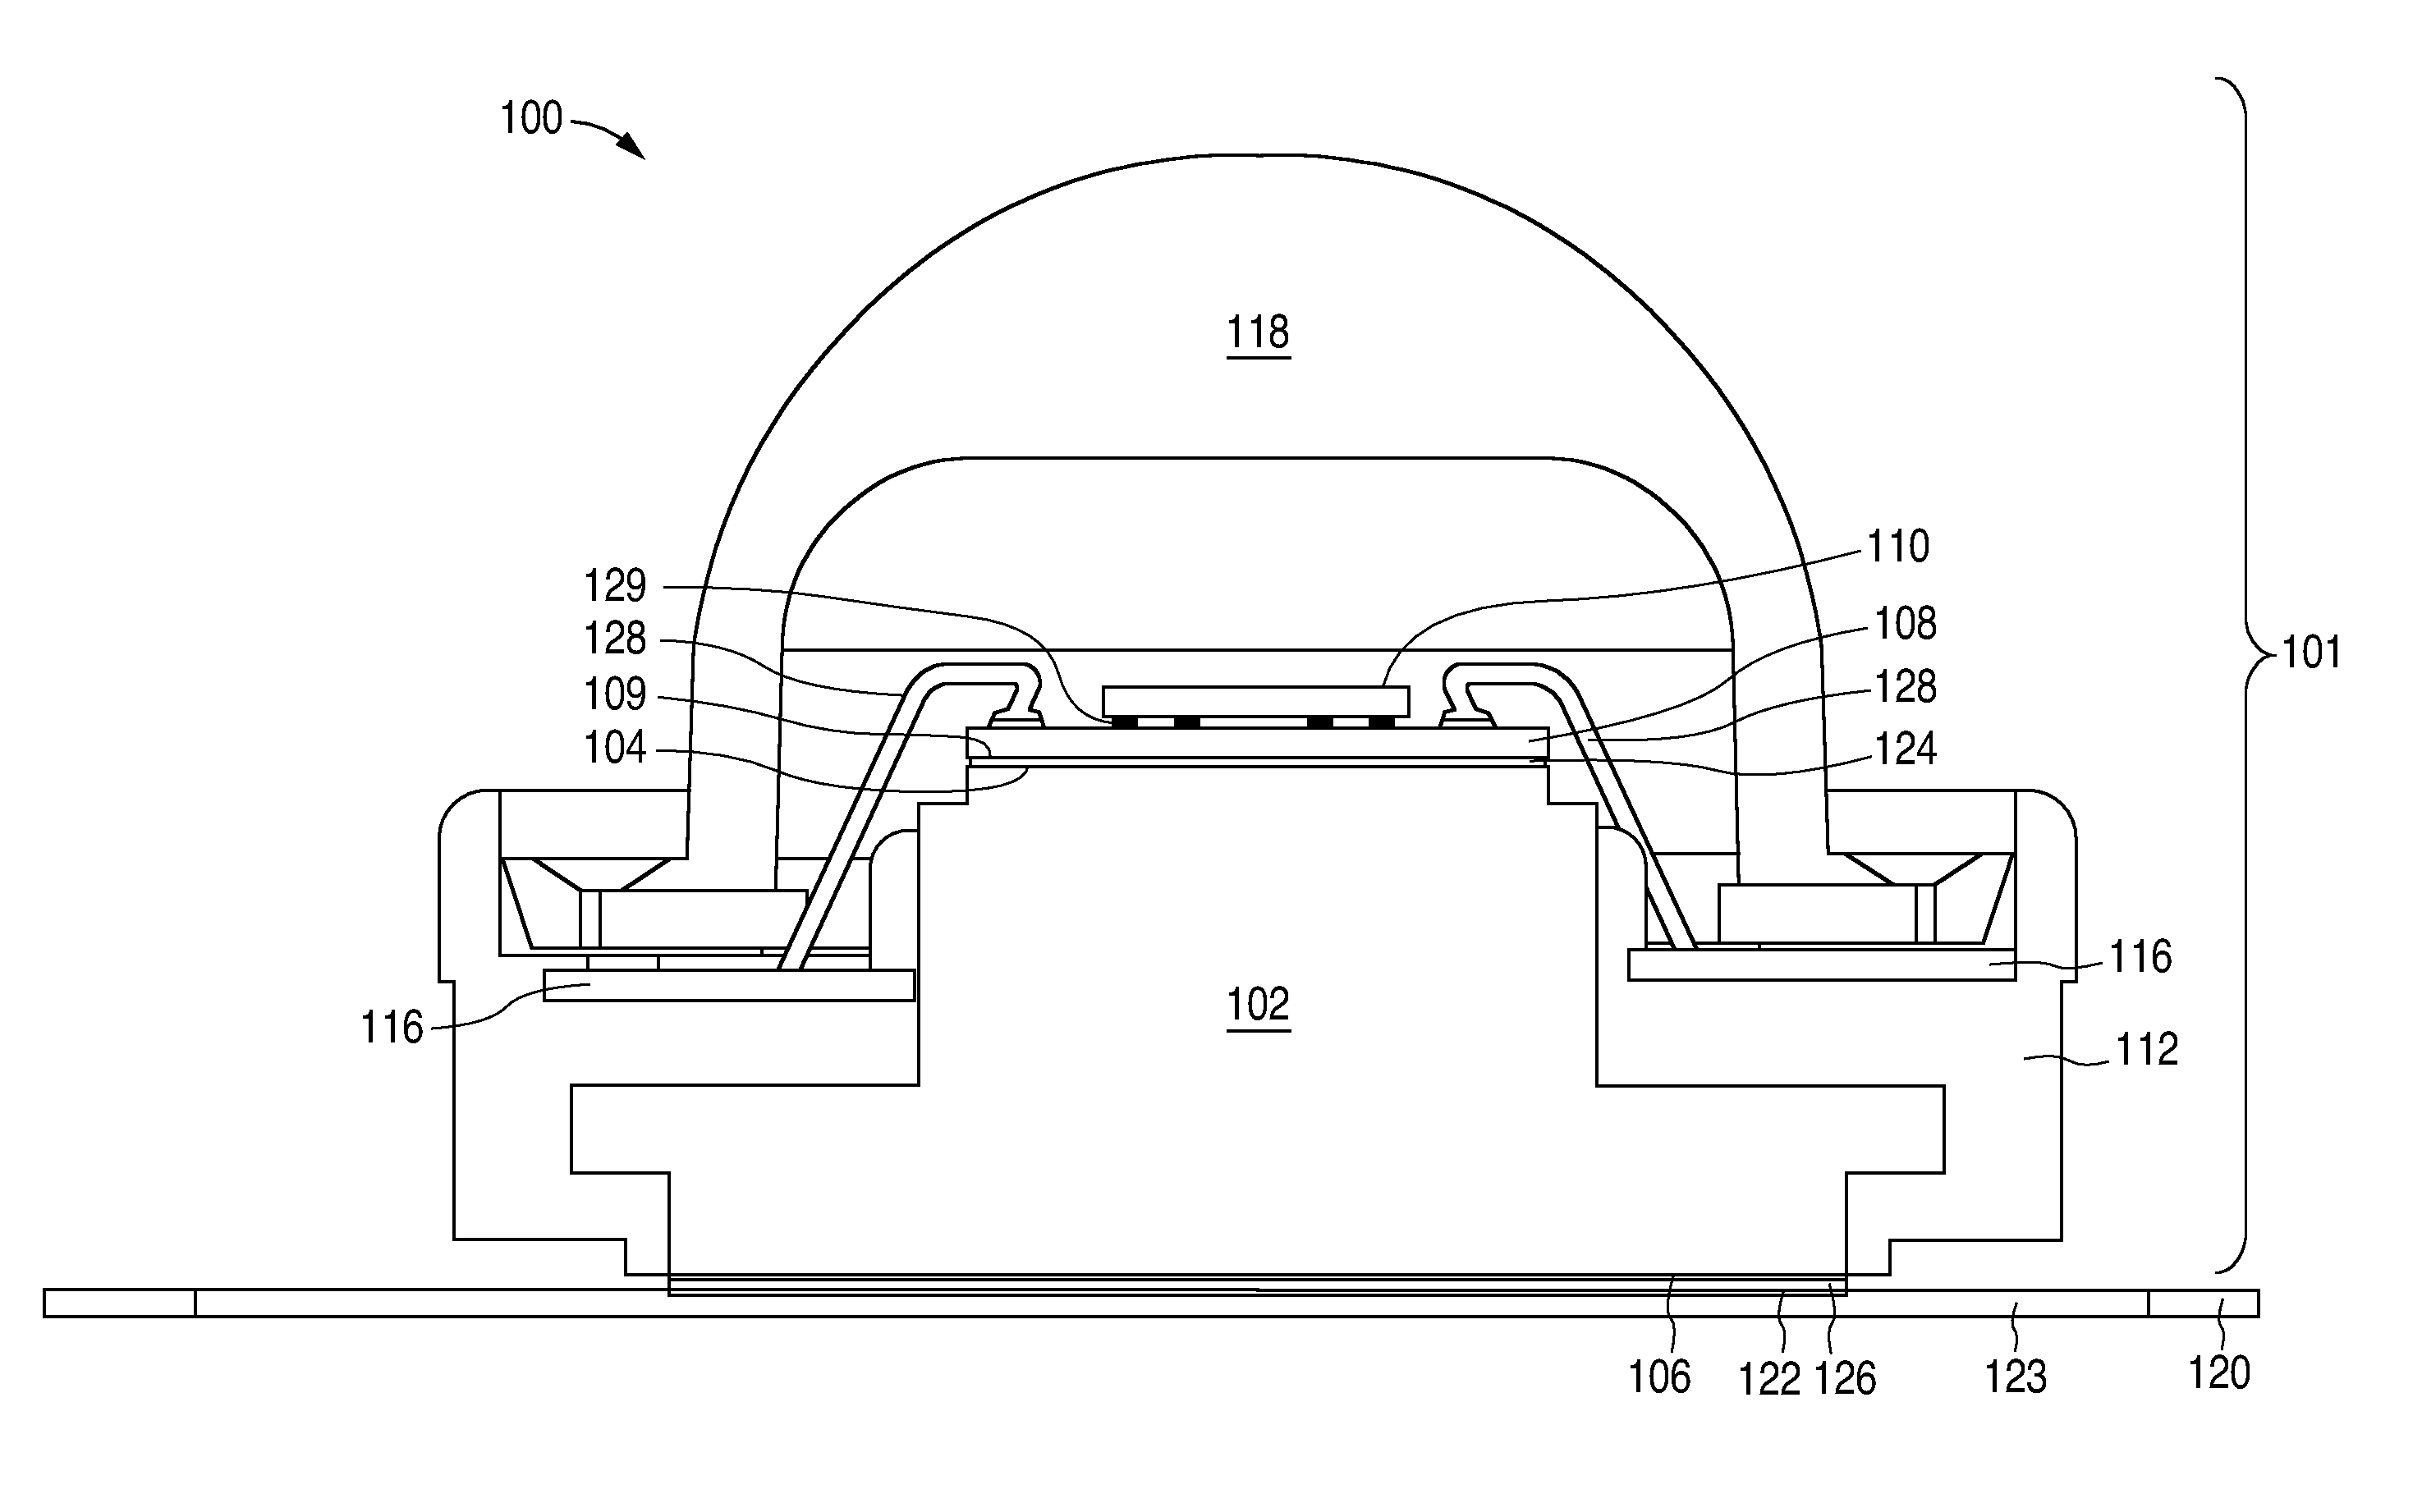 Accurate alignment of an LED assembly